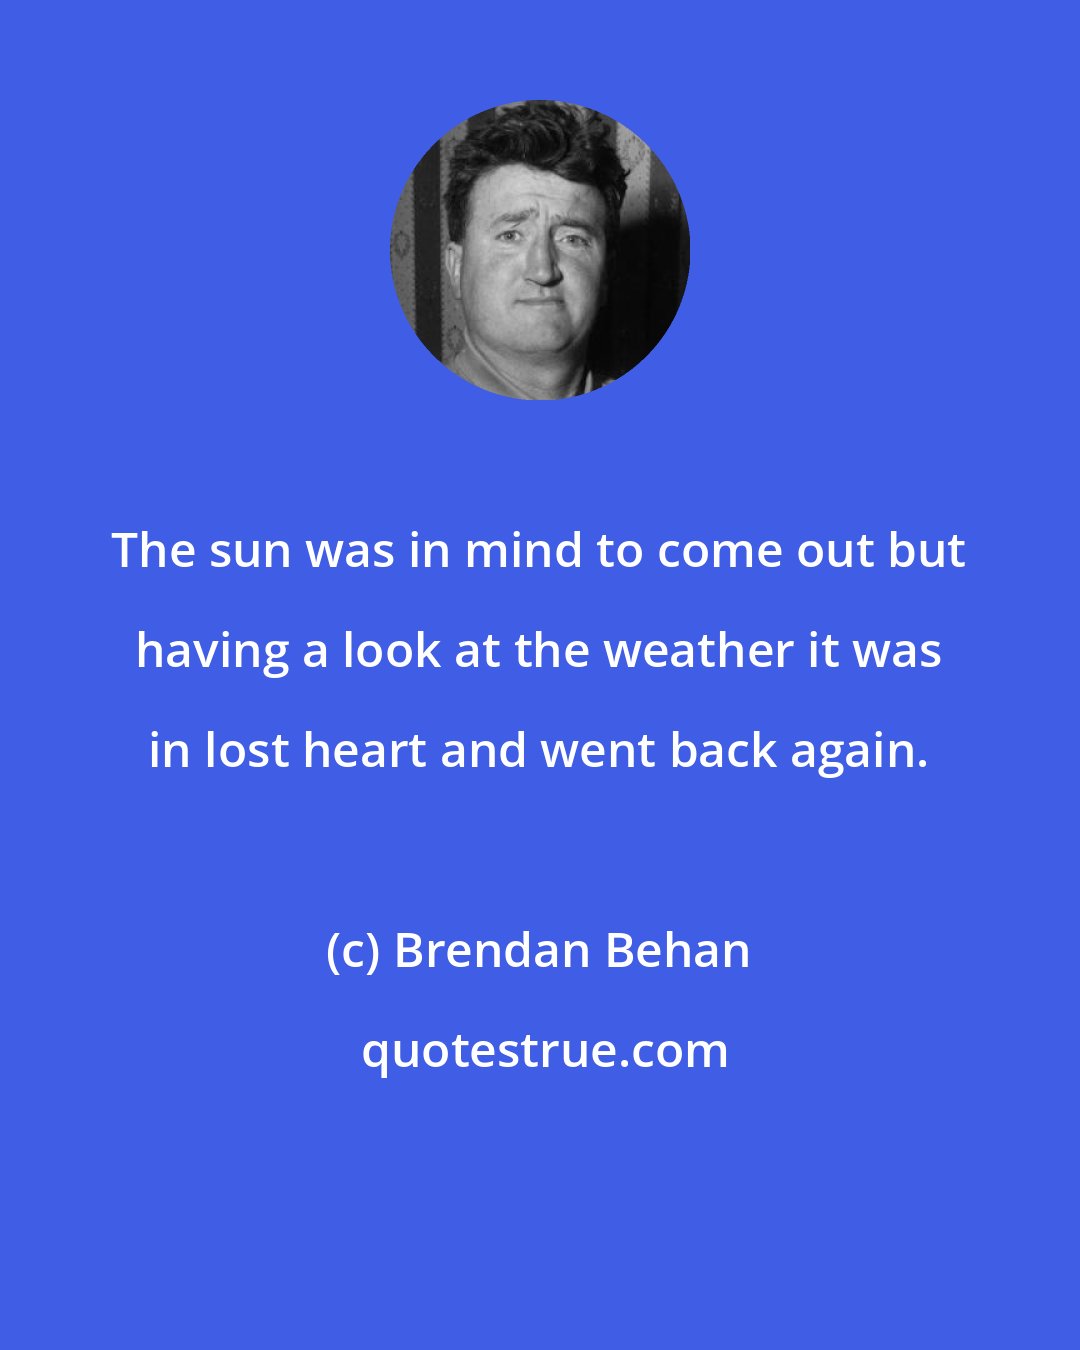 Brendan Behan: The sun was in mind to come out but having a look at the weather it was in lost heart and went back again.